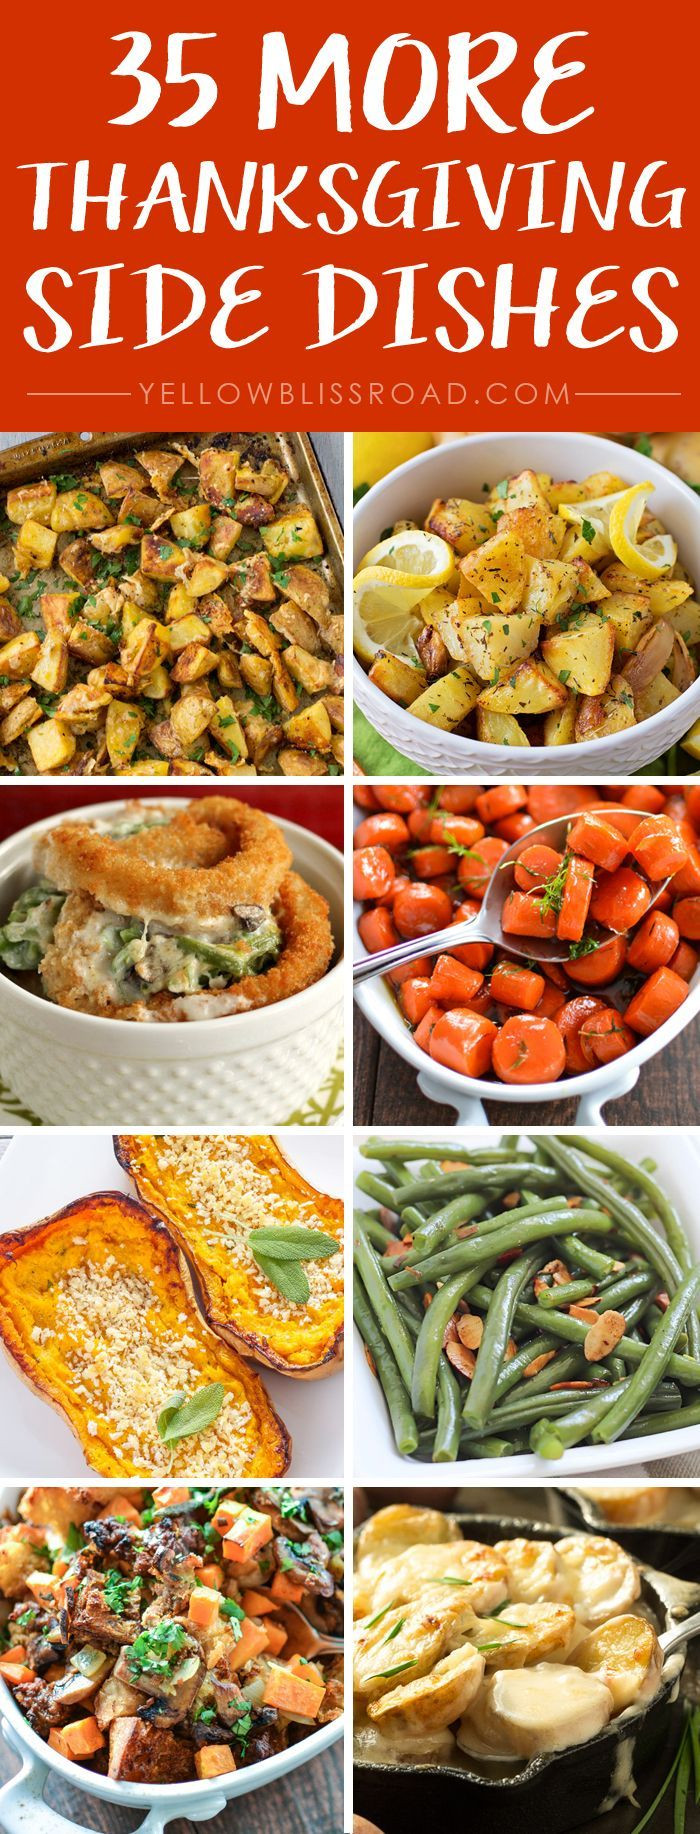 Thanksgiving Side Dishes Ideas
 17 Best images about Thanksgiving ideas on Pinterest